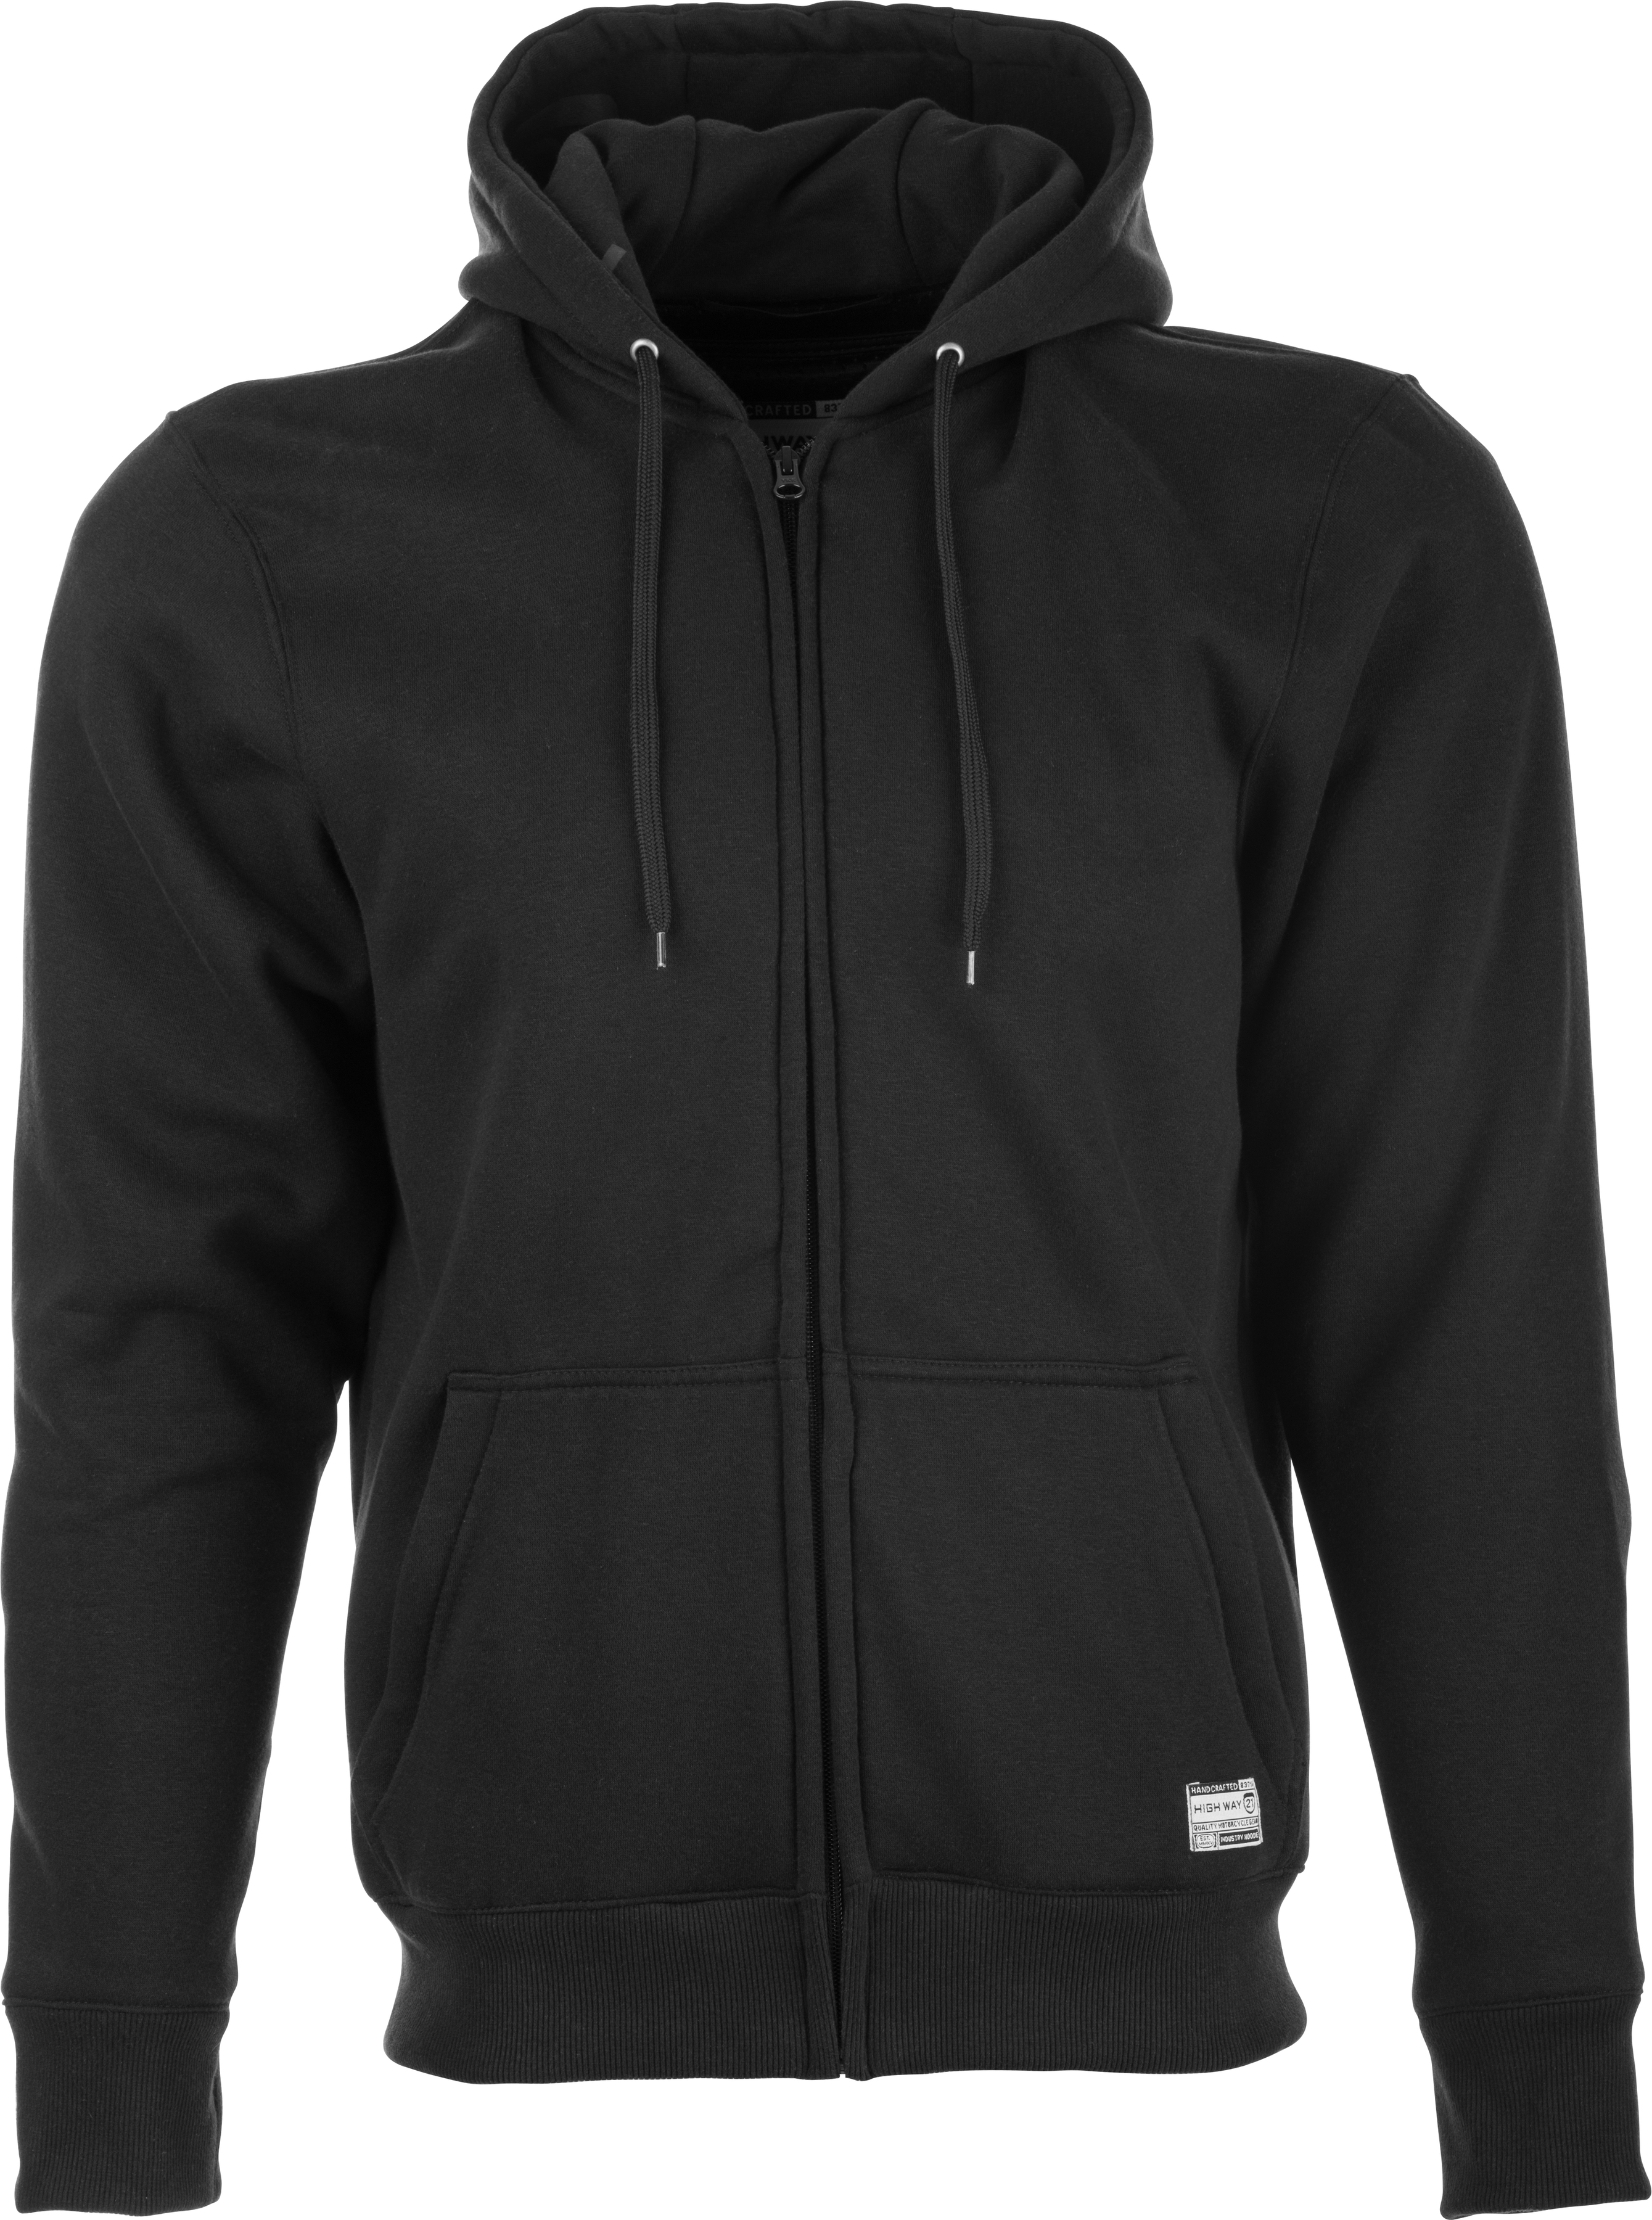 Industry Corporate Hoodie Black 3X-Large - Click Image to Close